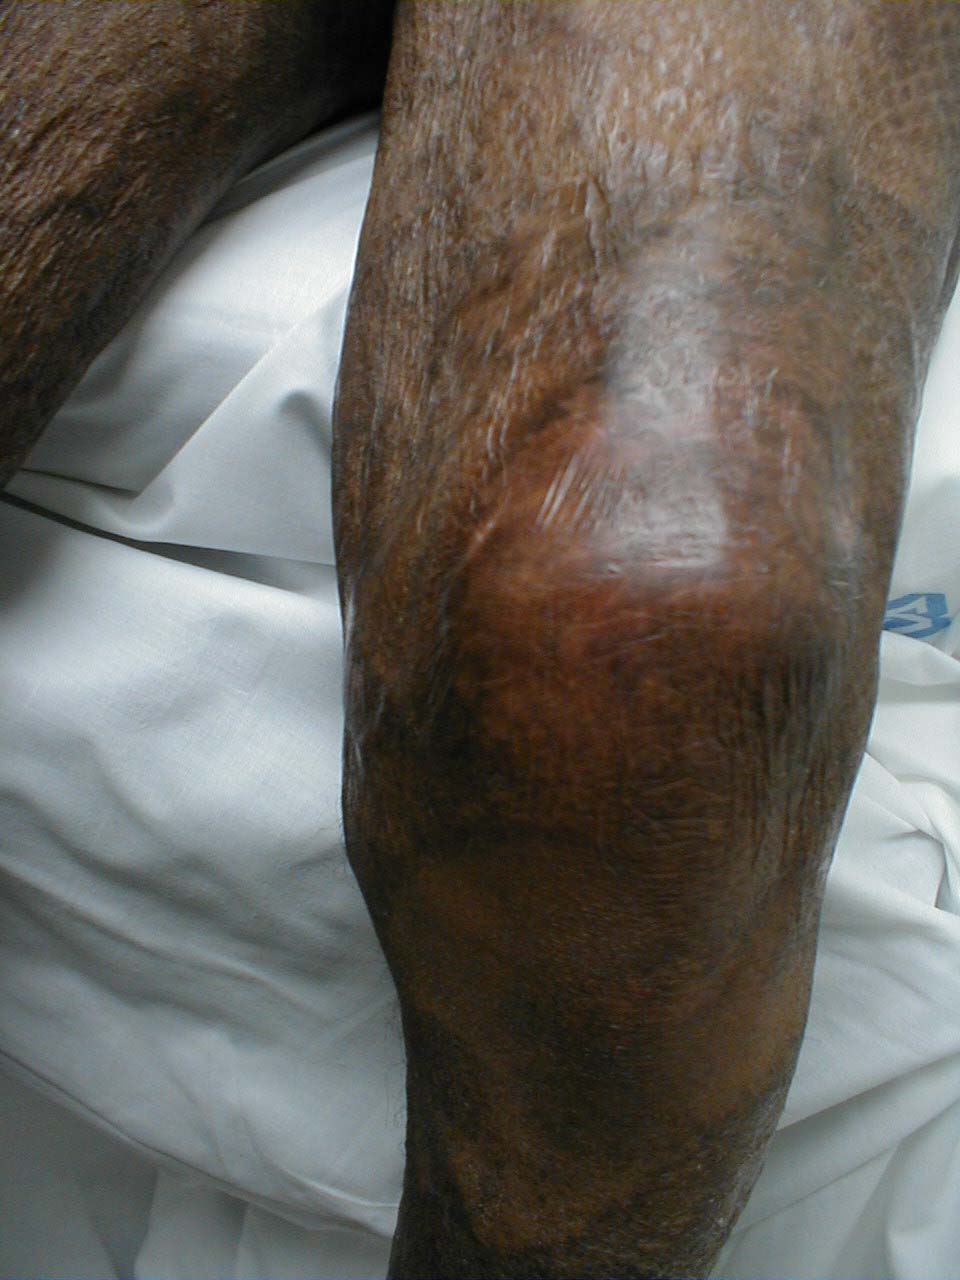 Picture demonstrates normal knee for comparison. skin changes seen in both legs are related to burns that patient suffered previously.